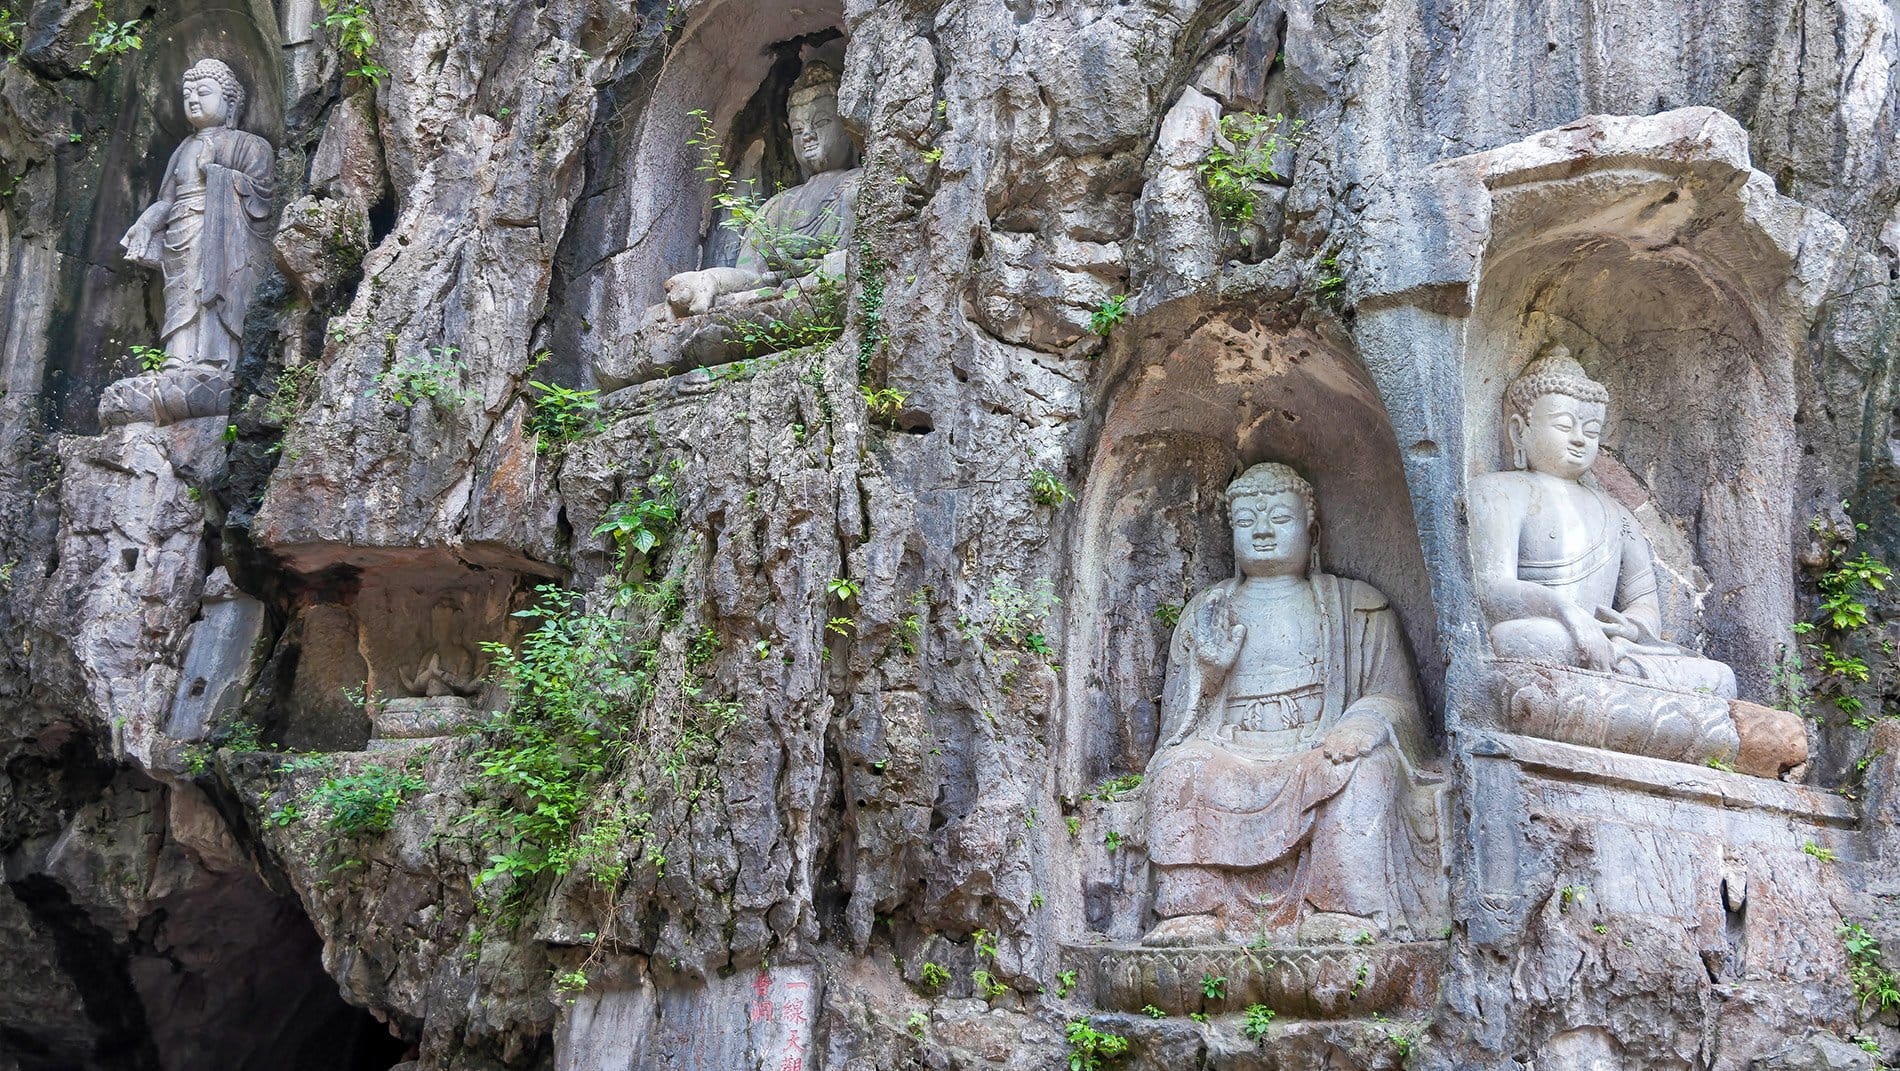 The Peak That Flew From Afar & Buddhism~The Peak That Flew From Afar is a limestone rock face decorated with 492 exquisite Buddhist statues, lining the walkway to Lingyin temple, founded in the fourth century.